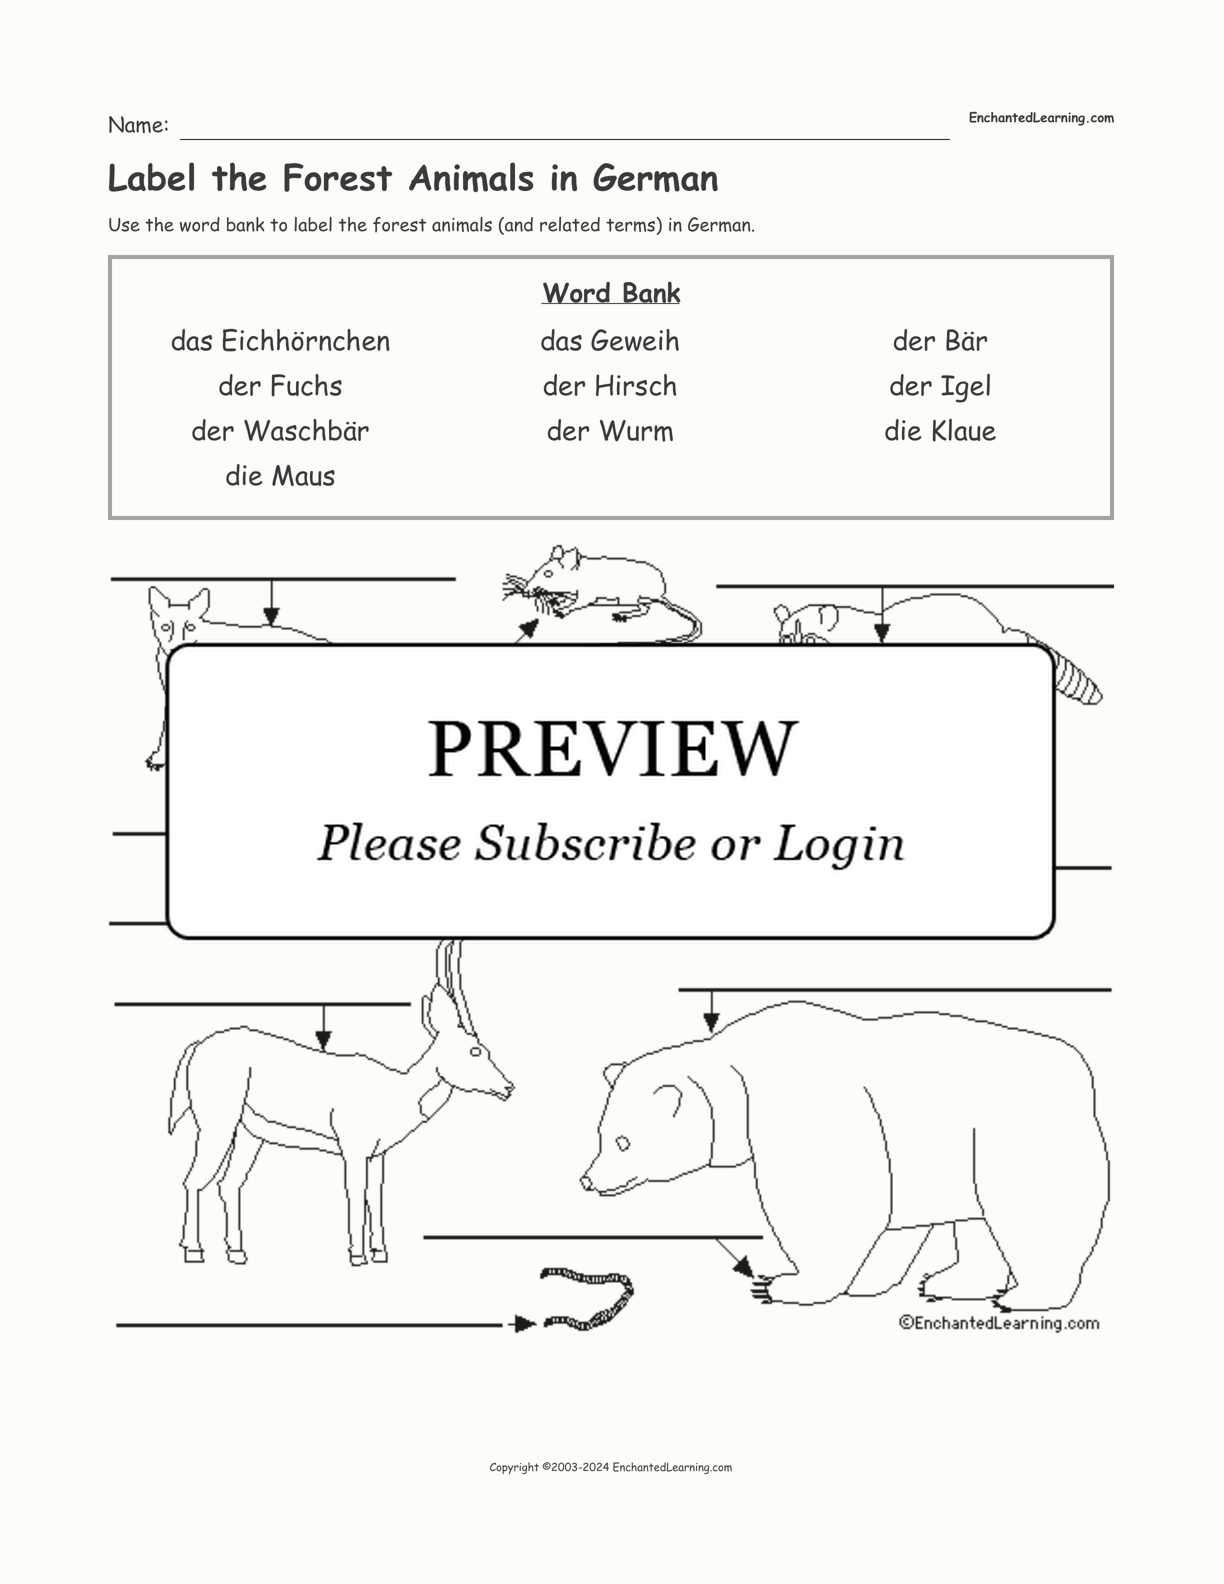 Label the Forest Animals in German interactive worksheet page 1